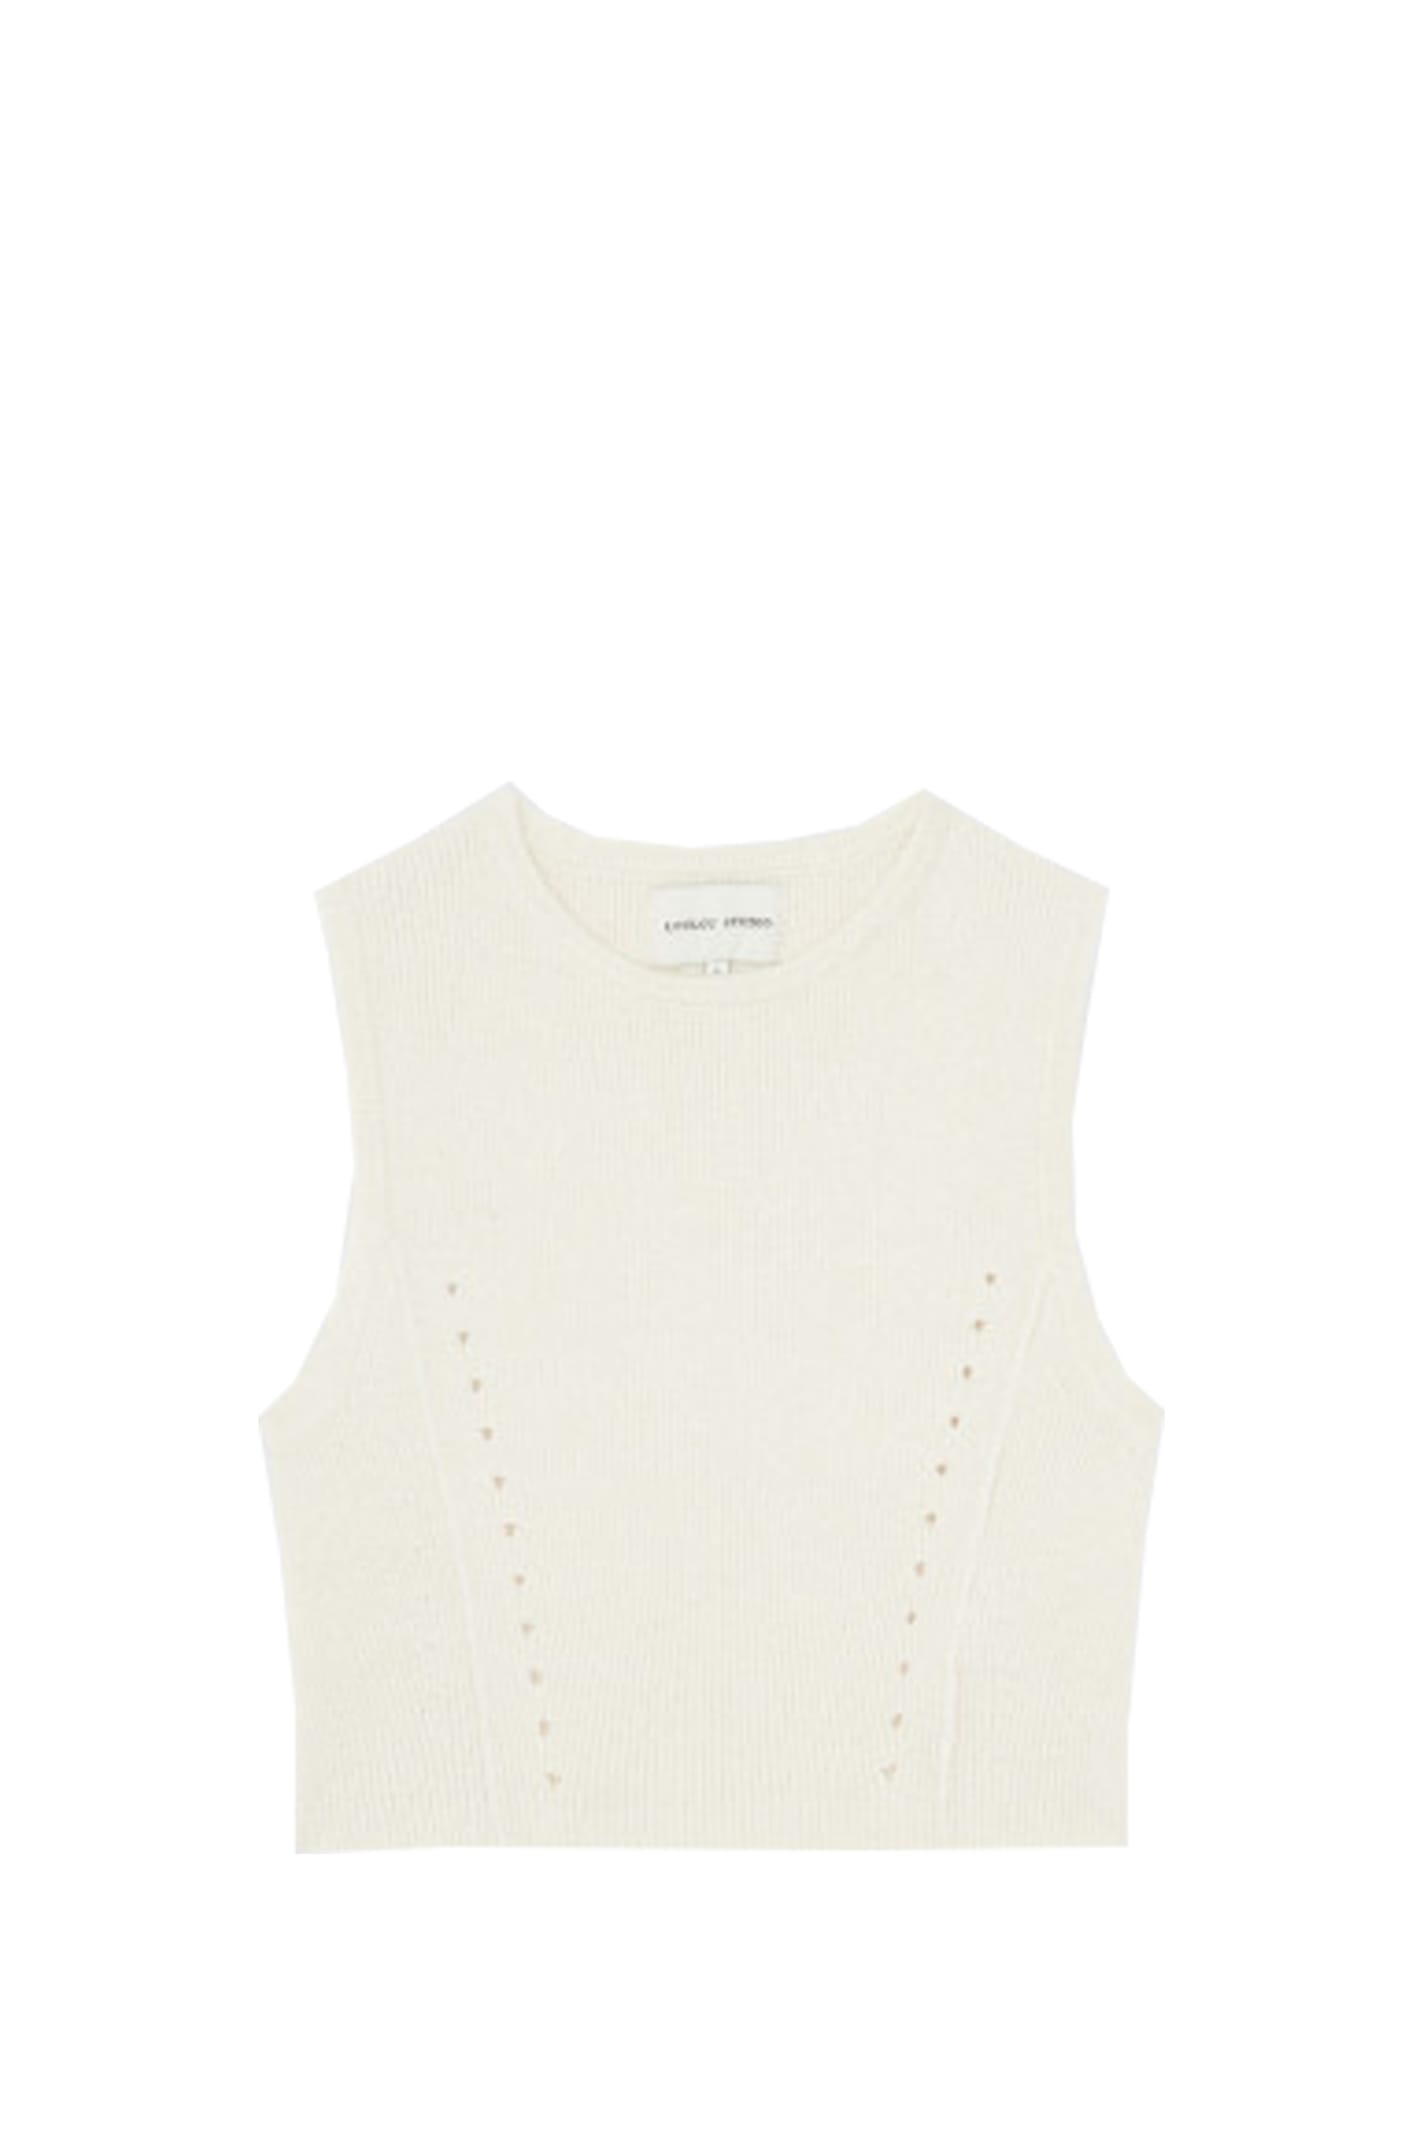 Loulou Studio chace Top